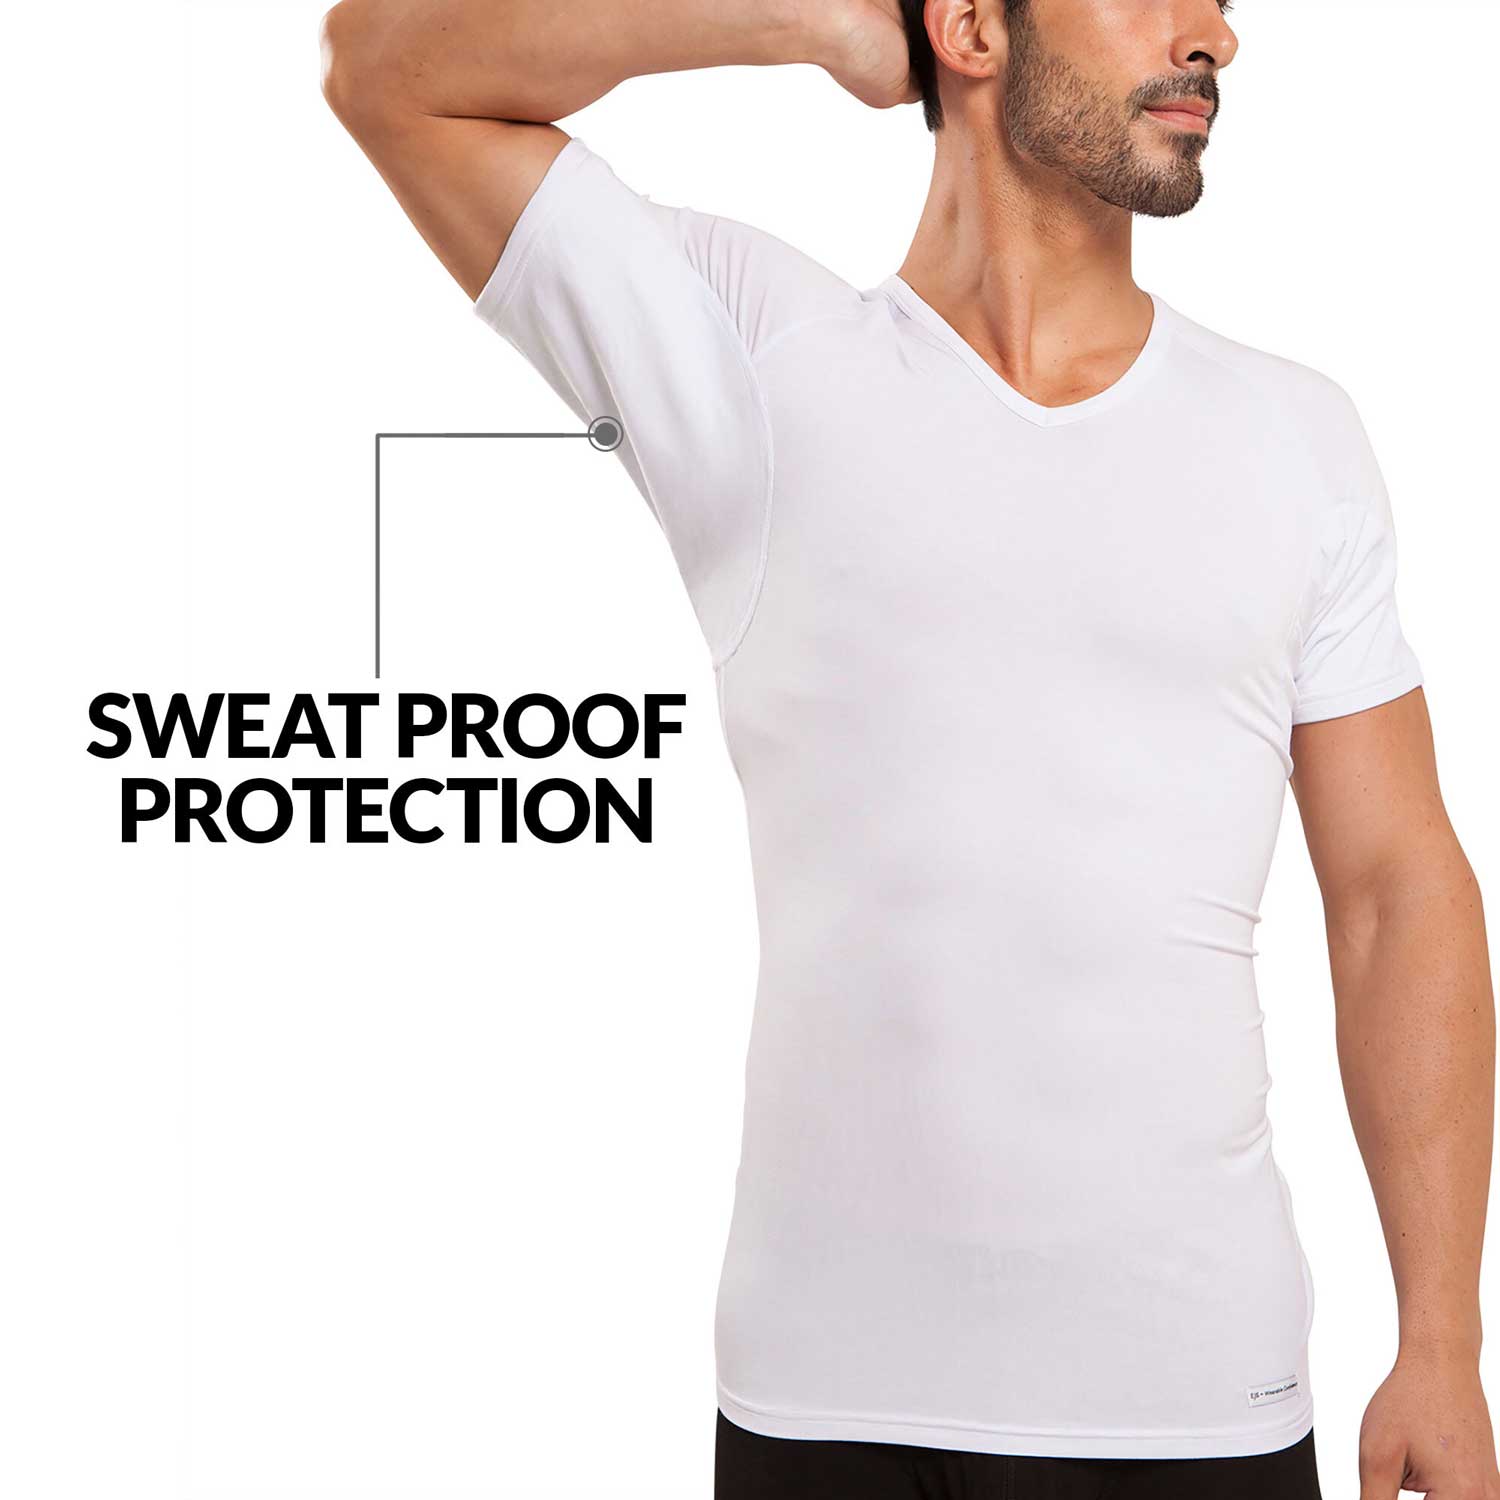 Ni parade midt i intetsteds V-Neck Micro Modal Sweat Proof Undershirts For Men– Ejis